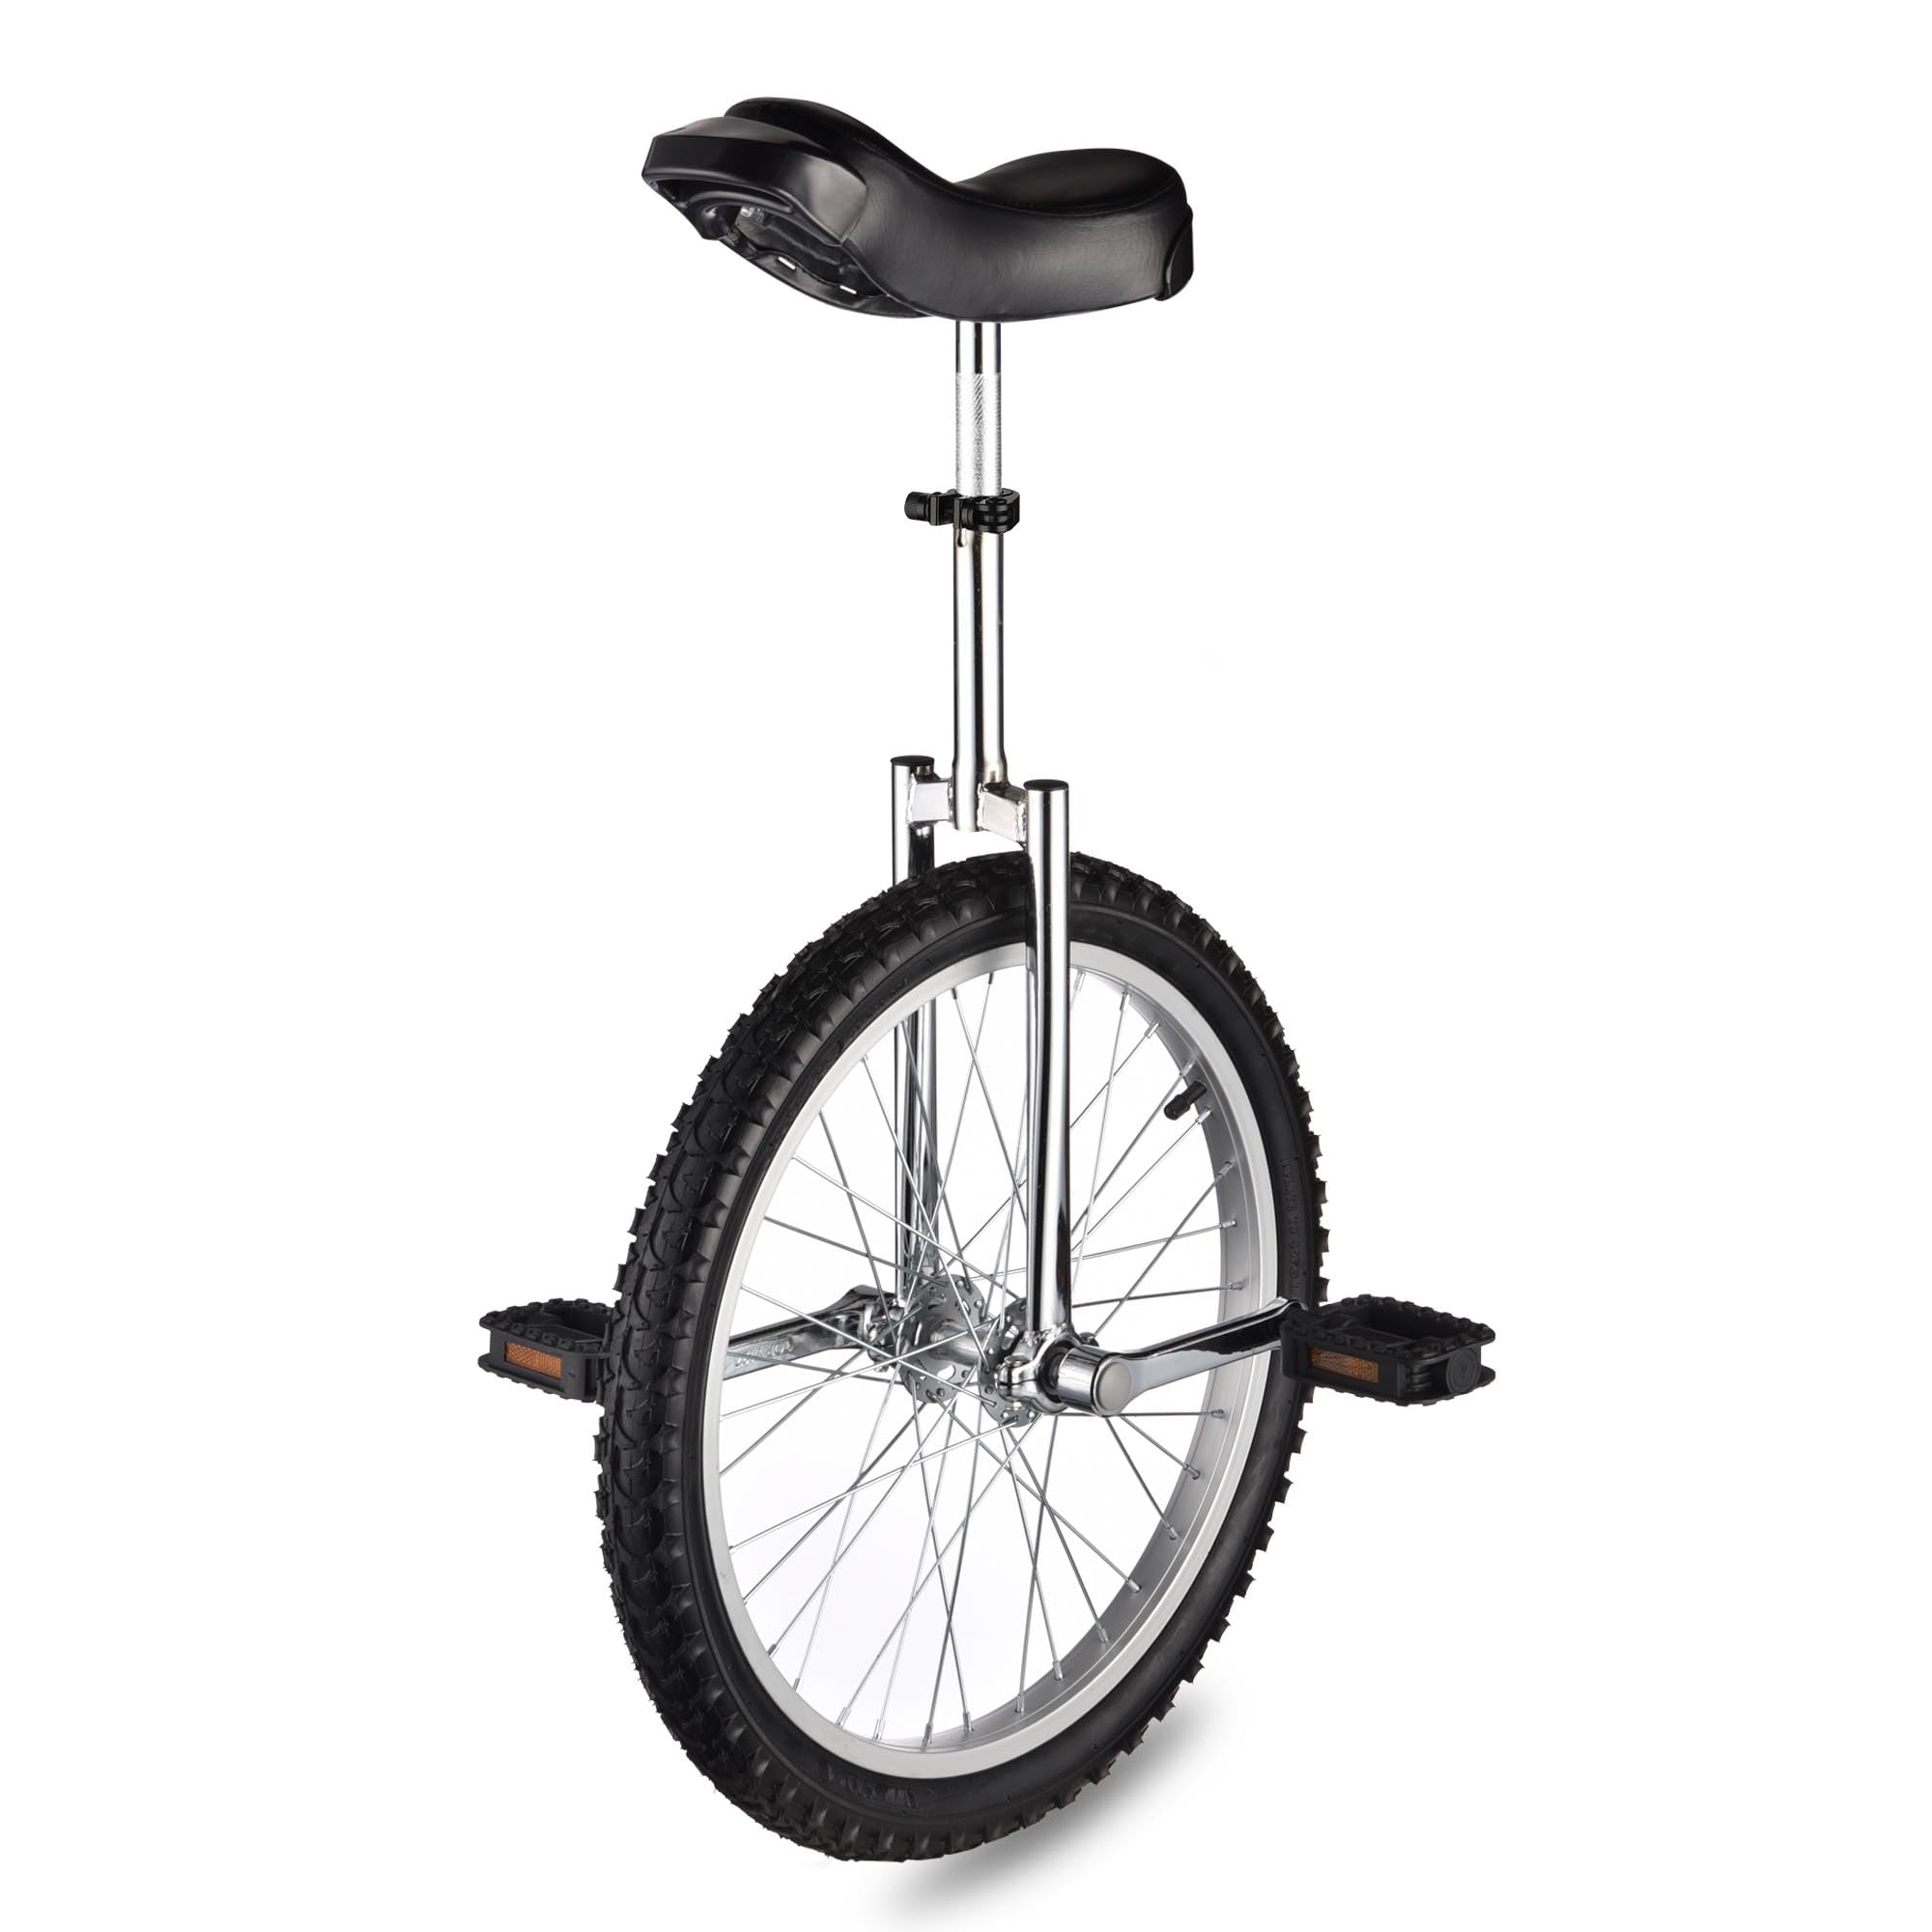 AW Outdoor Unicycle Review: 16-24 Inch Wheel Adjustable Seat Exercise Bicycle